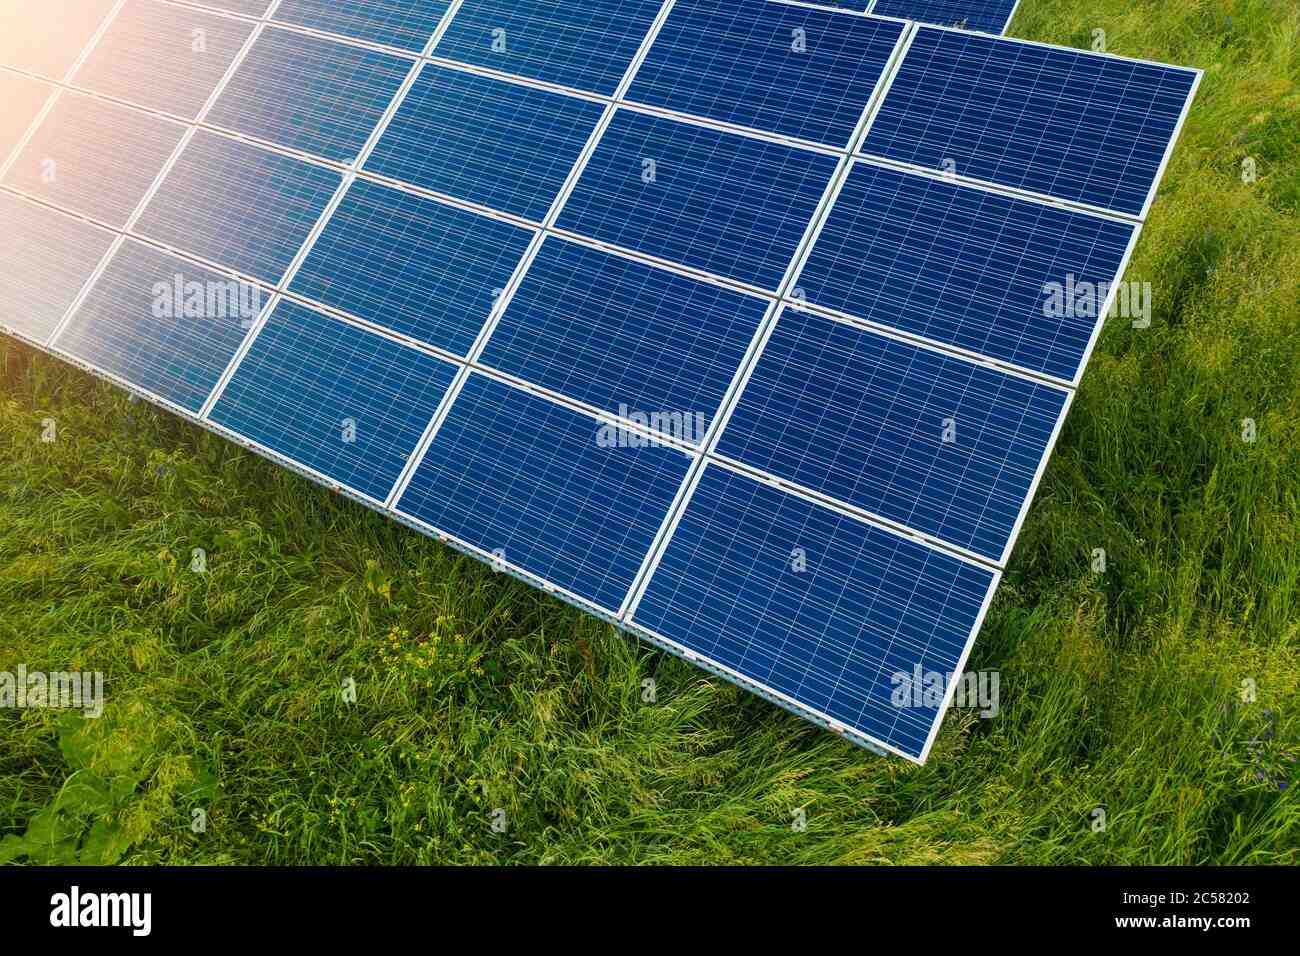 How solar energy is beneficial for the environment ?